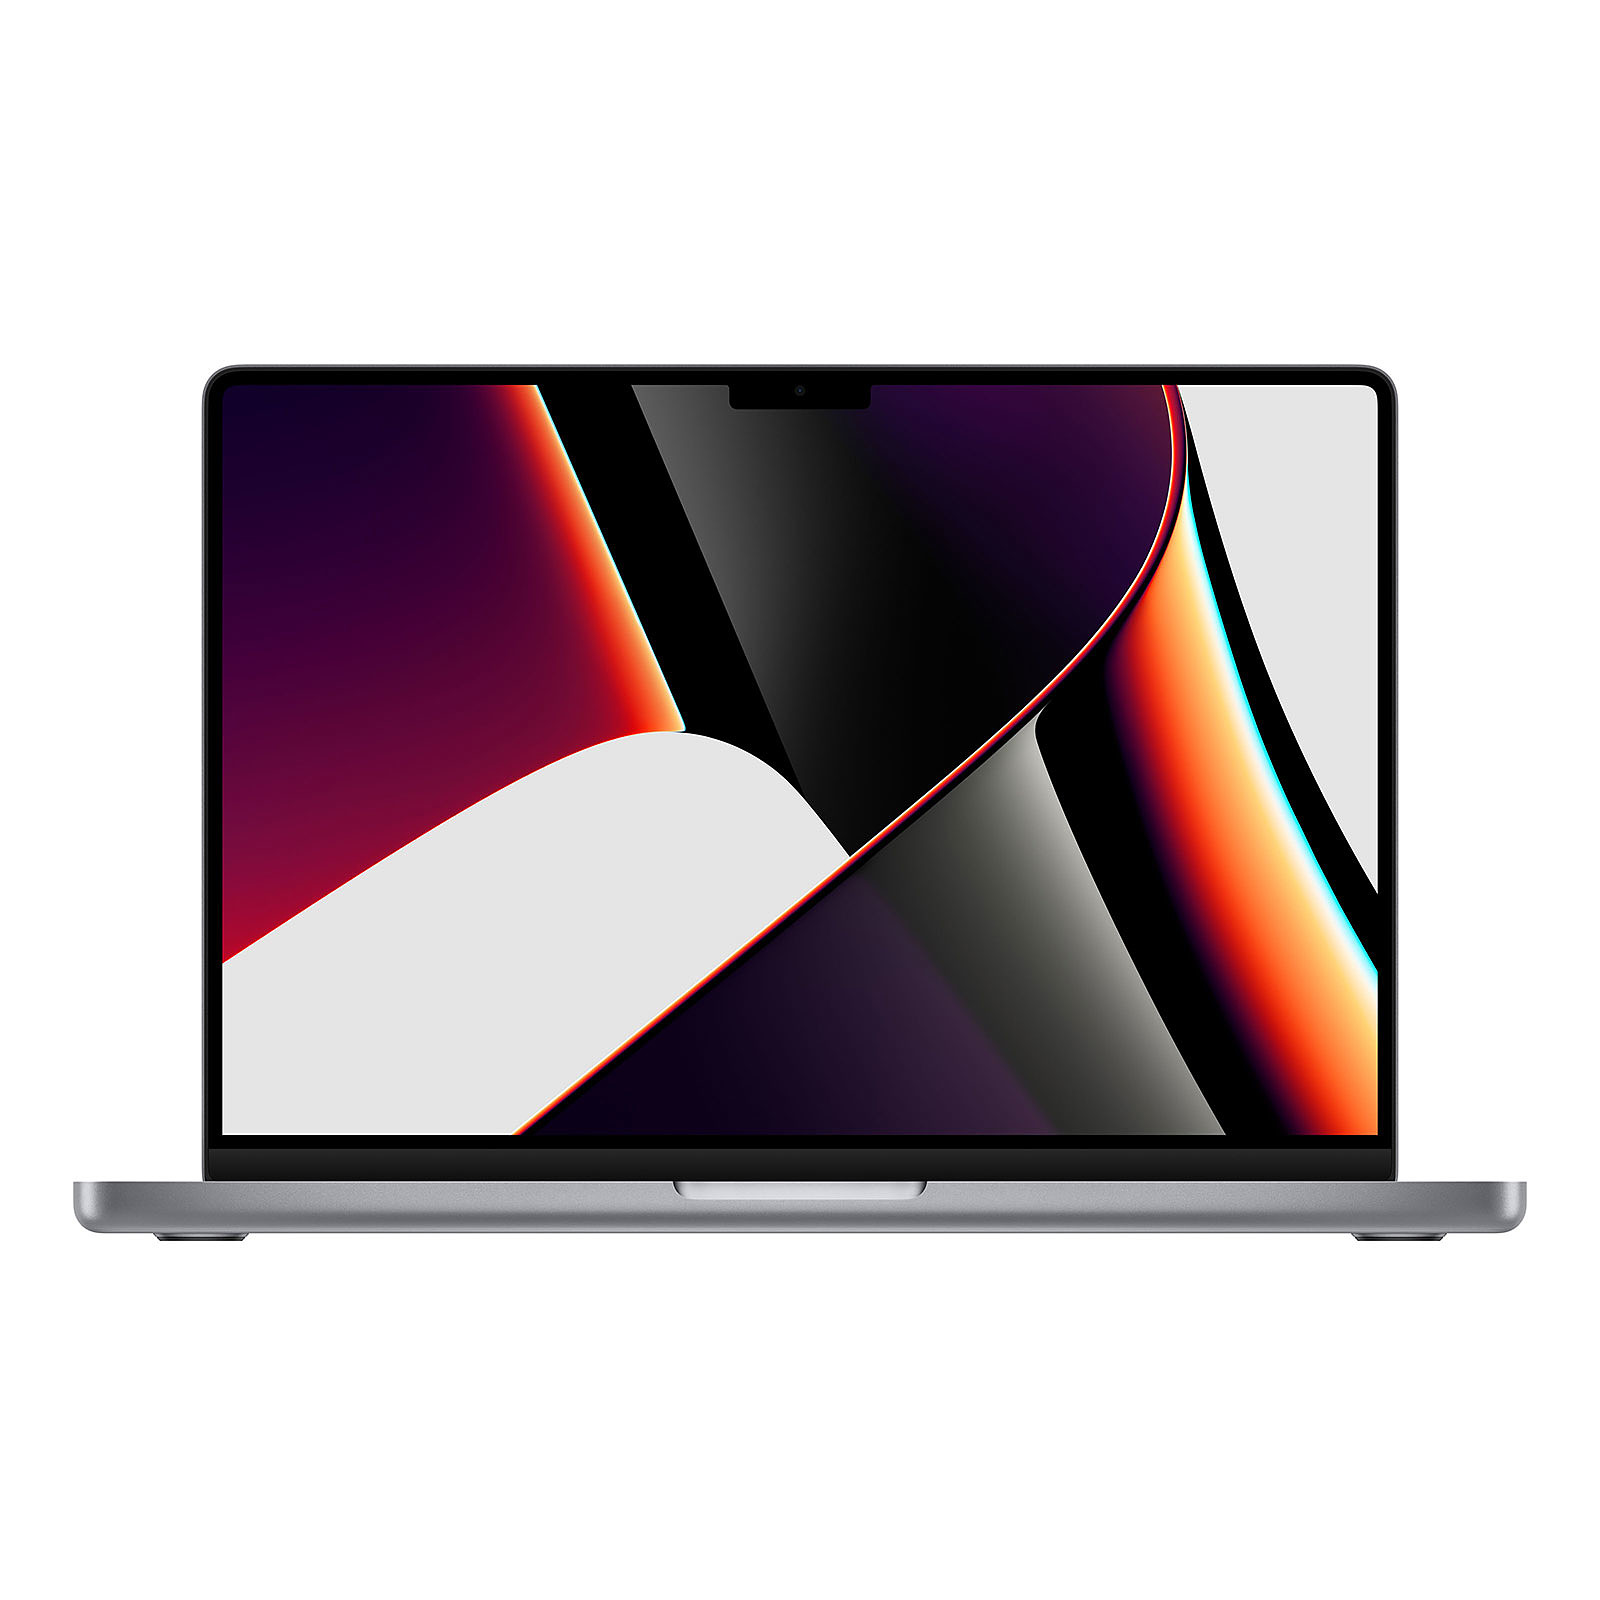 Apple MacBook Pro M1 Max (2021) 14" Gris sideral 32Go/1To (MKGQ3FN/A-M1-MAX-32GB) - MacBook Apple